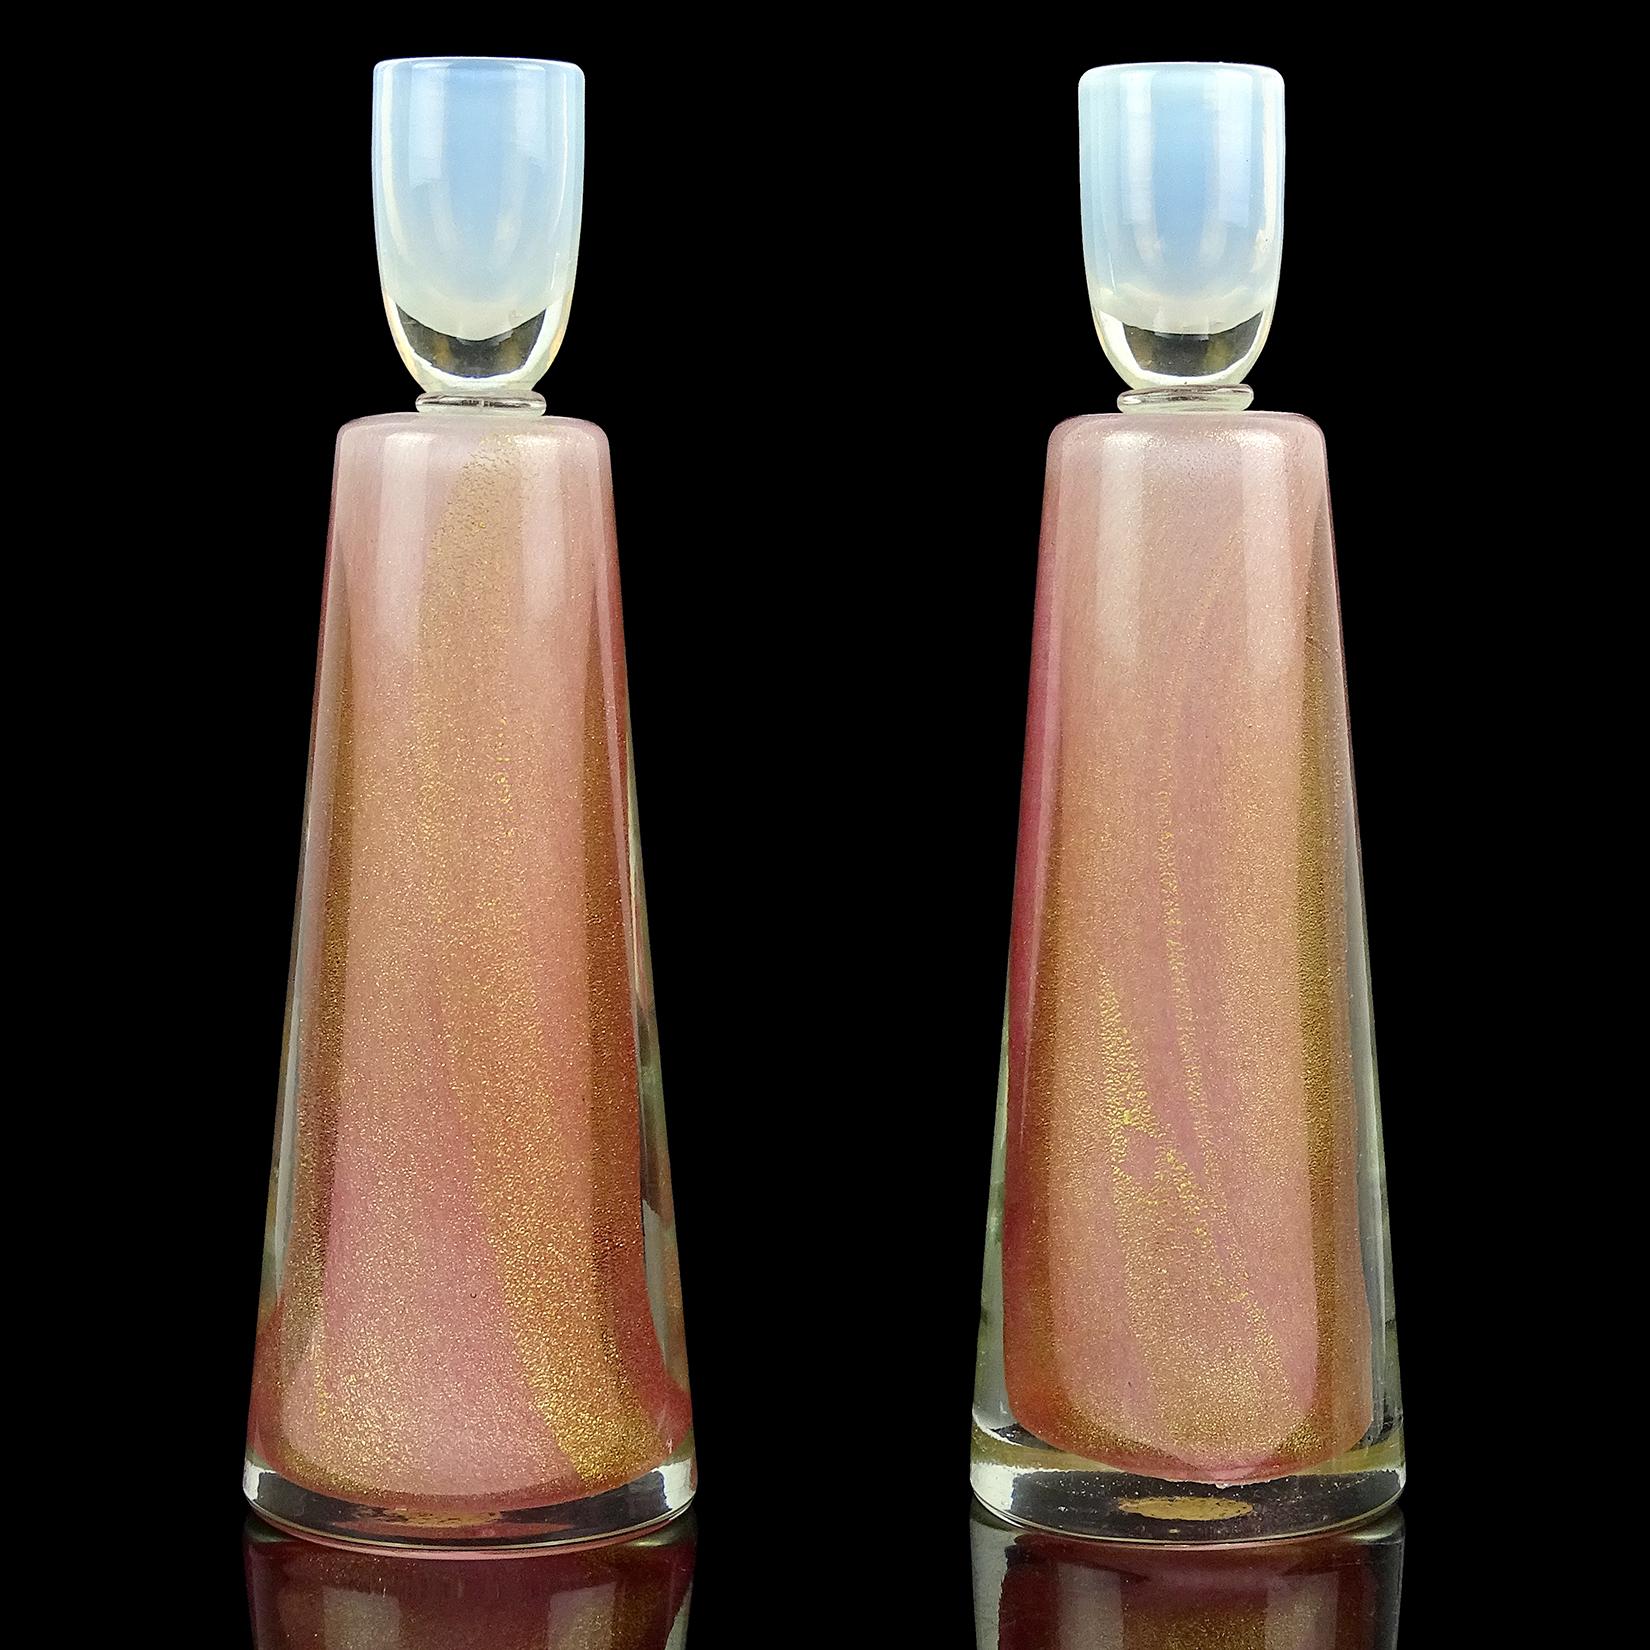 Beautiful pair of vintage Murano hand blown Sommerso pink, white opalescent and gold flecks Italian art glass candlesticks. Documented to the Fratelli Toso company. The candleholders at the top are opal white and clear glass. The bodies have a thick